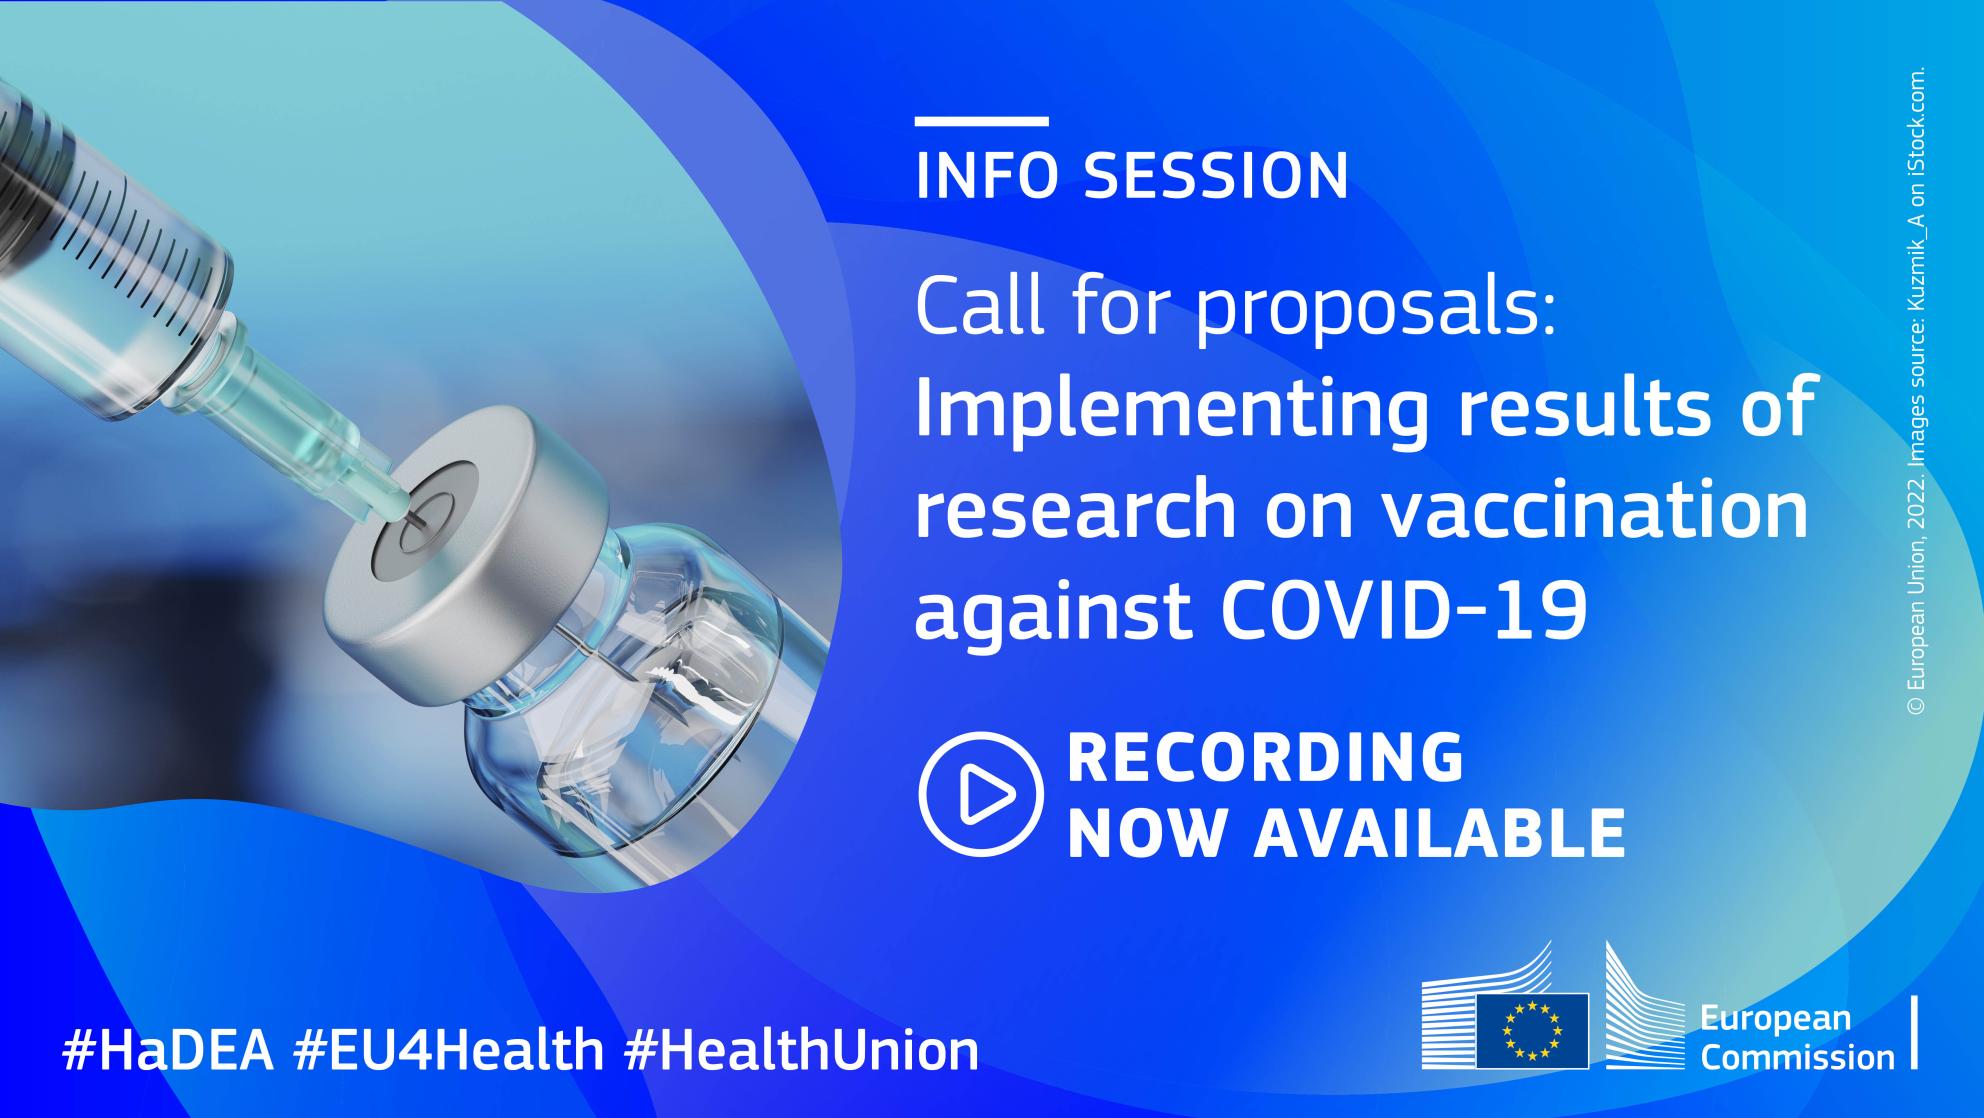 Recording now available: info session on EU4Health call on vaccination against COVID-19